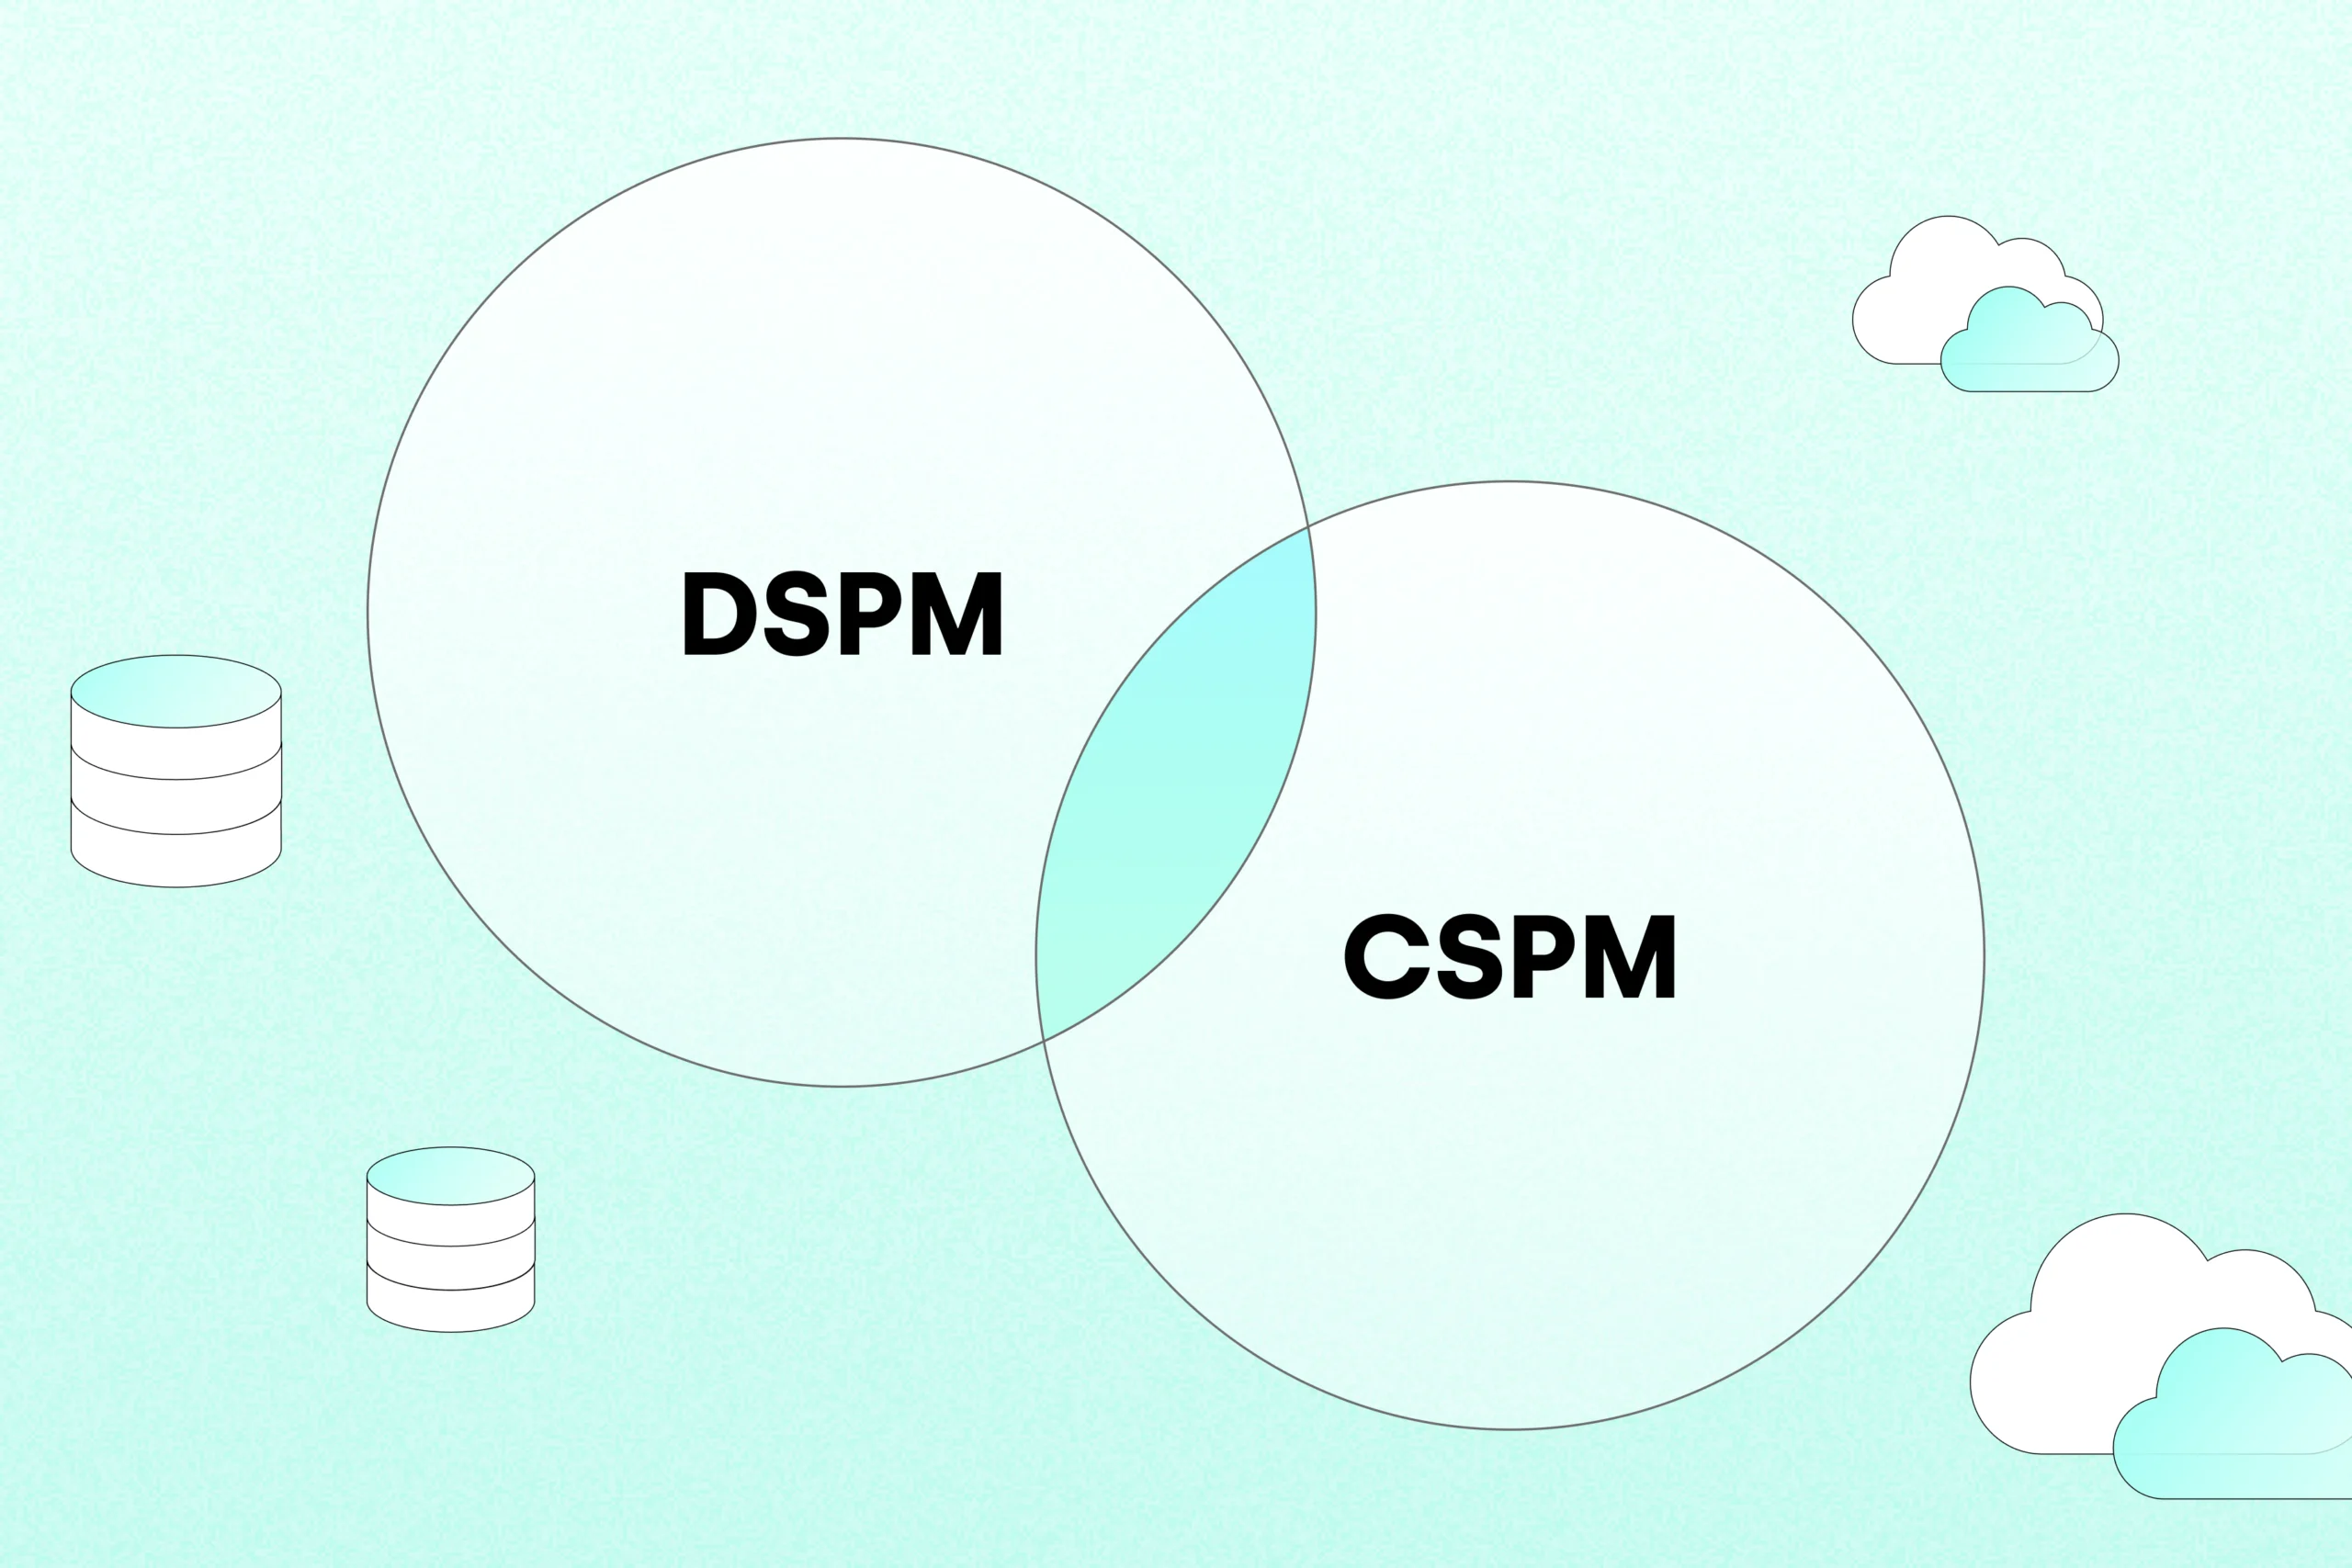 DSPM brings the CSPM concept closer to where it belongs; the business